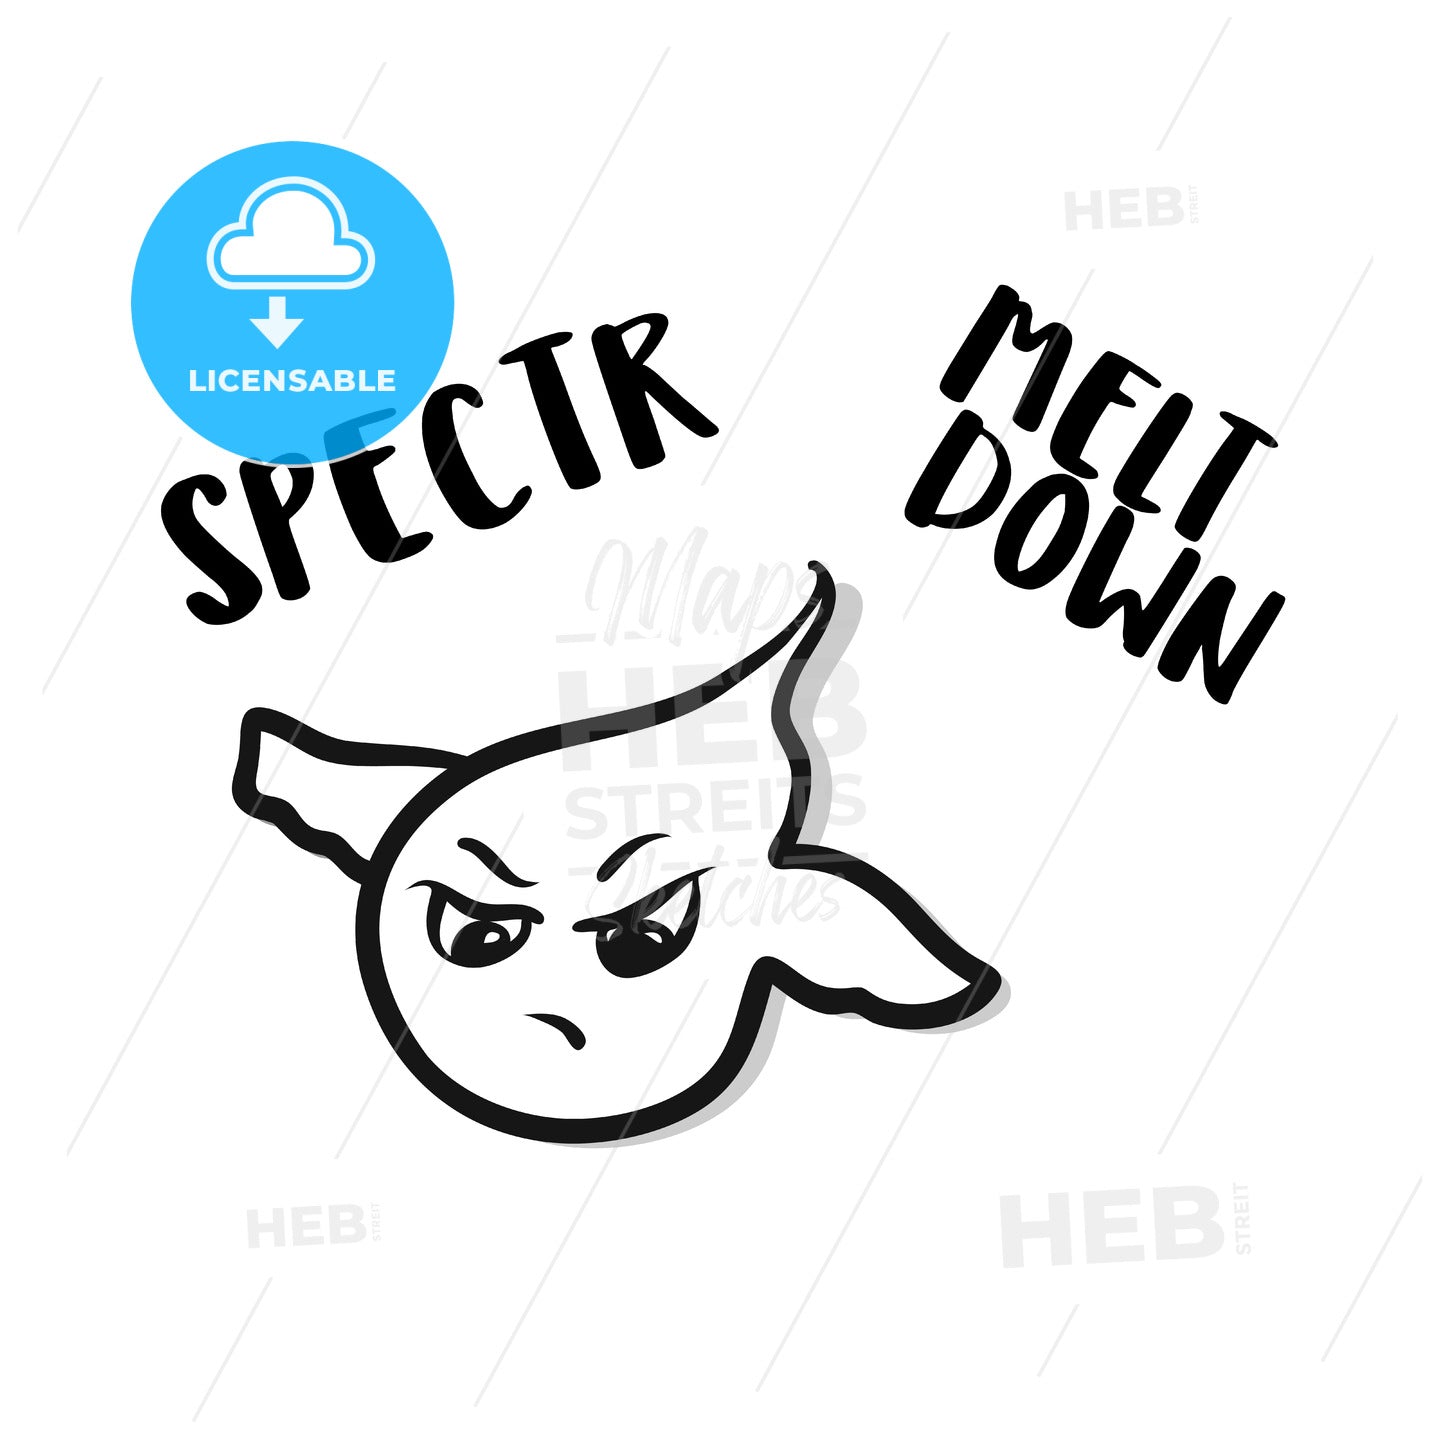 Spectr Meltdown attac ghost icon – instant download